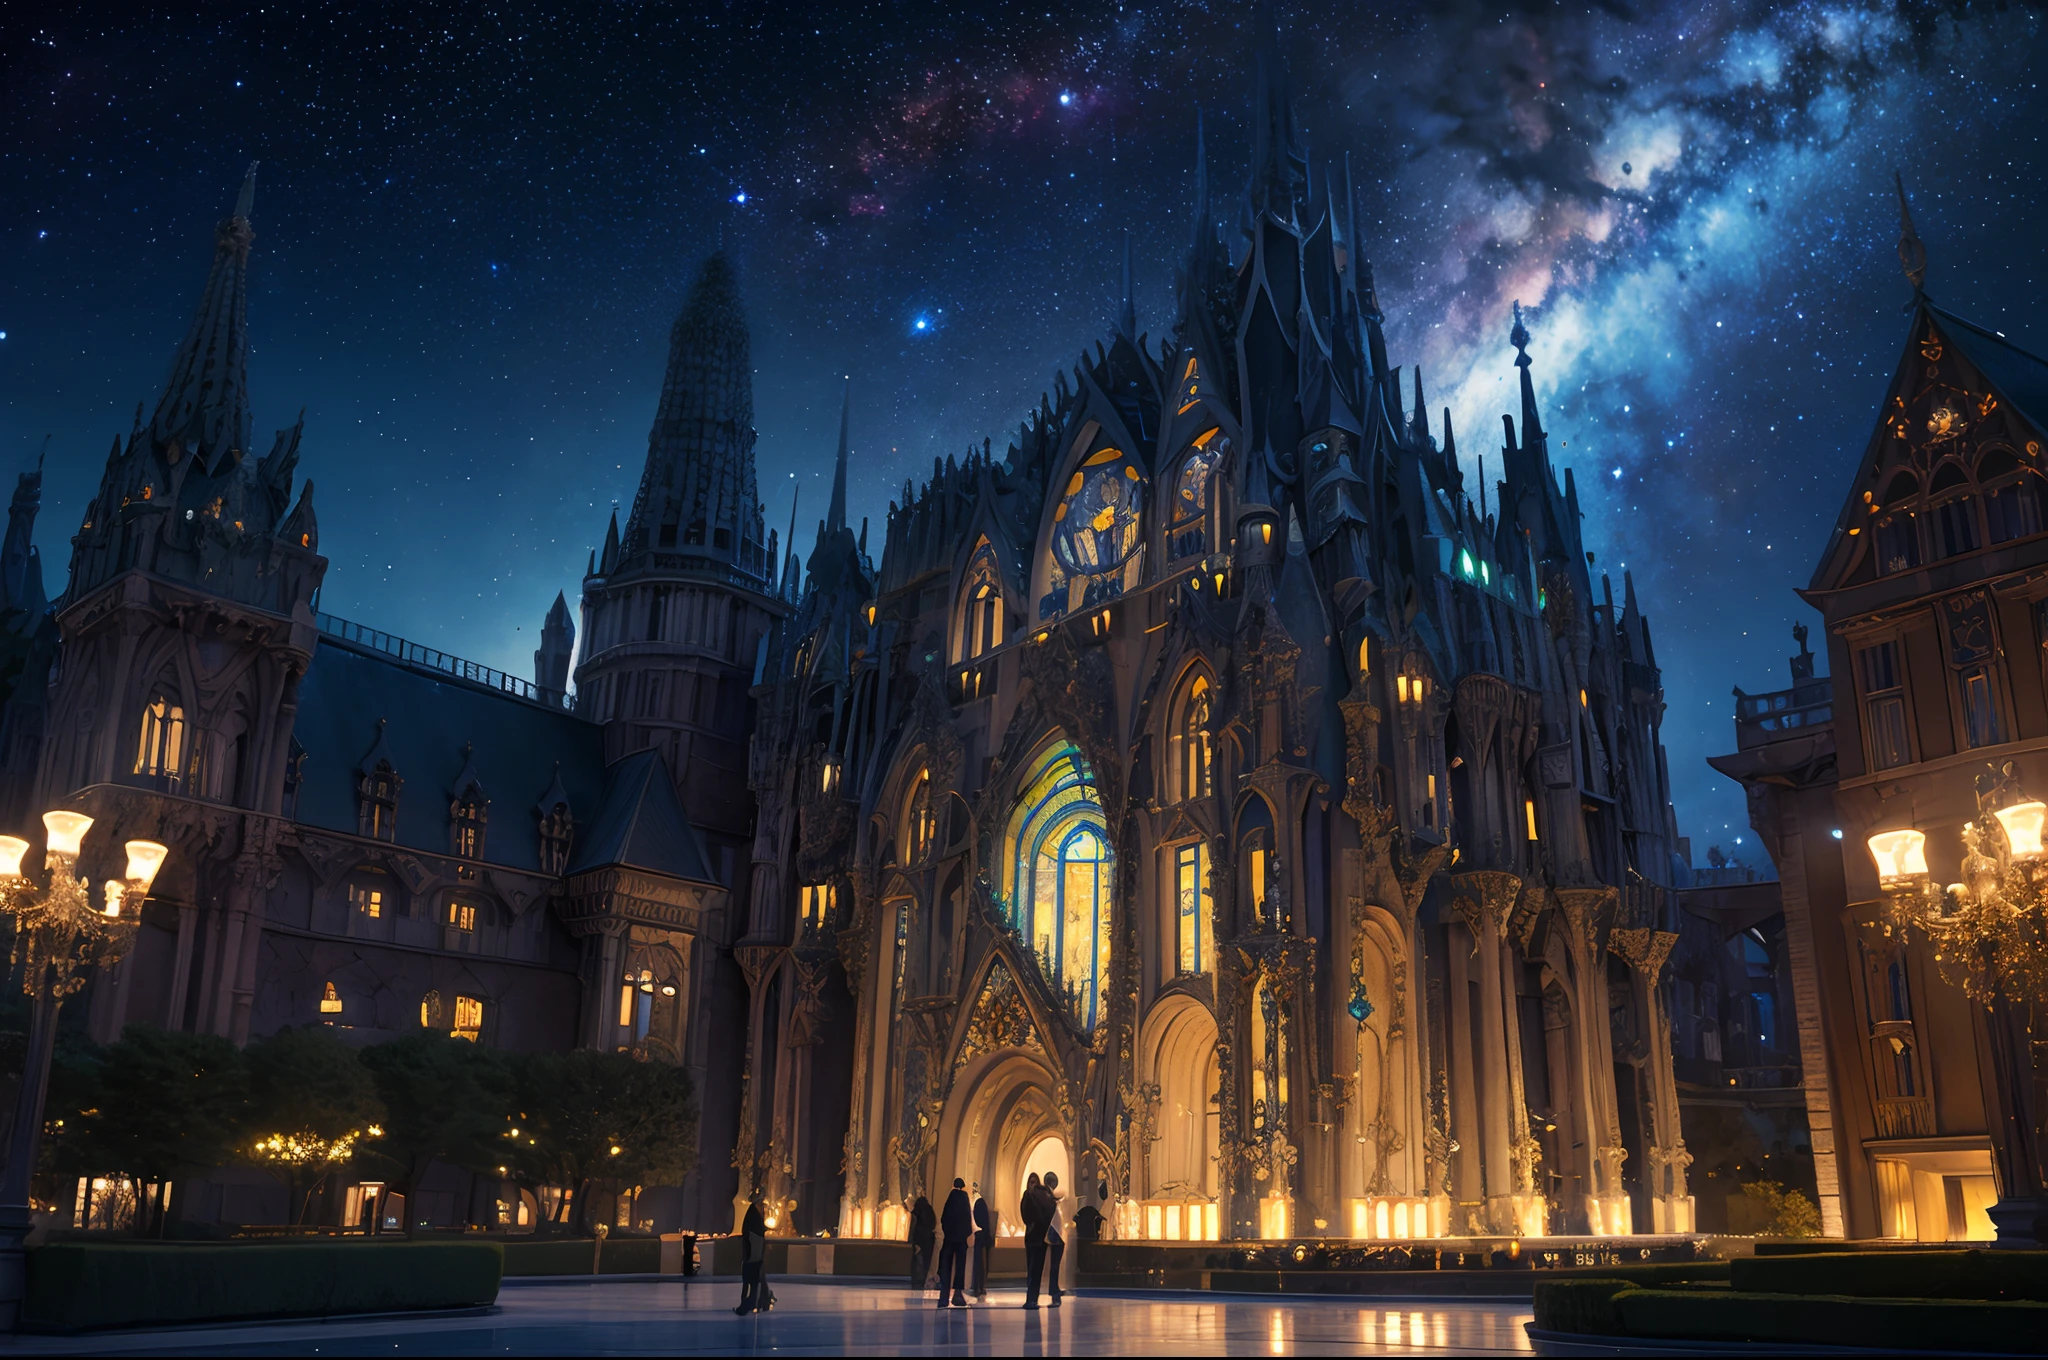 A giant ((space ship with a glass domo1.5)), carrying a beautiful elvish castle inside, art nouveau, Gaudí inspired with curved lines, some windows slightly illuminated, surrealistic, illuminated by stars, deep black starry sky with nebula as background, dreamy.